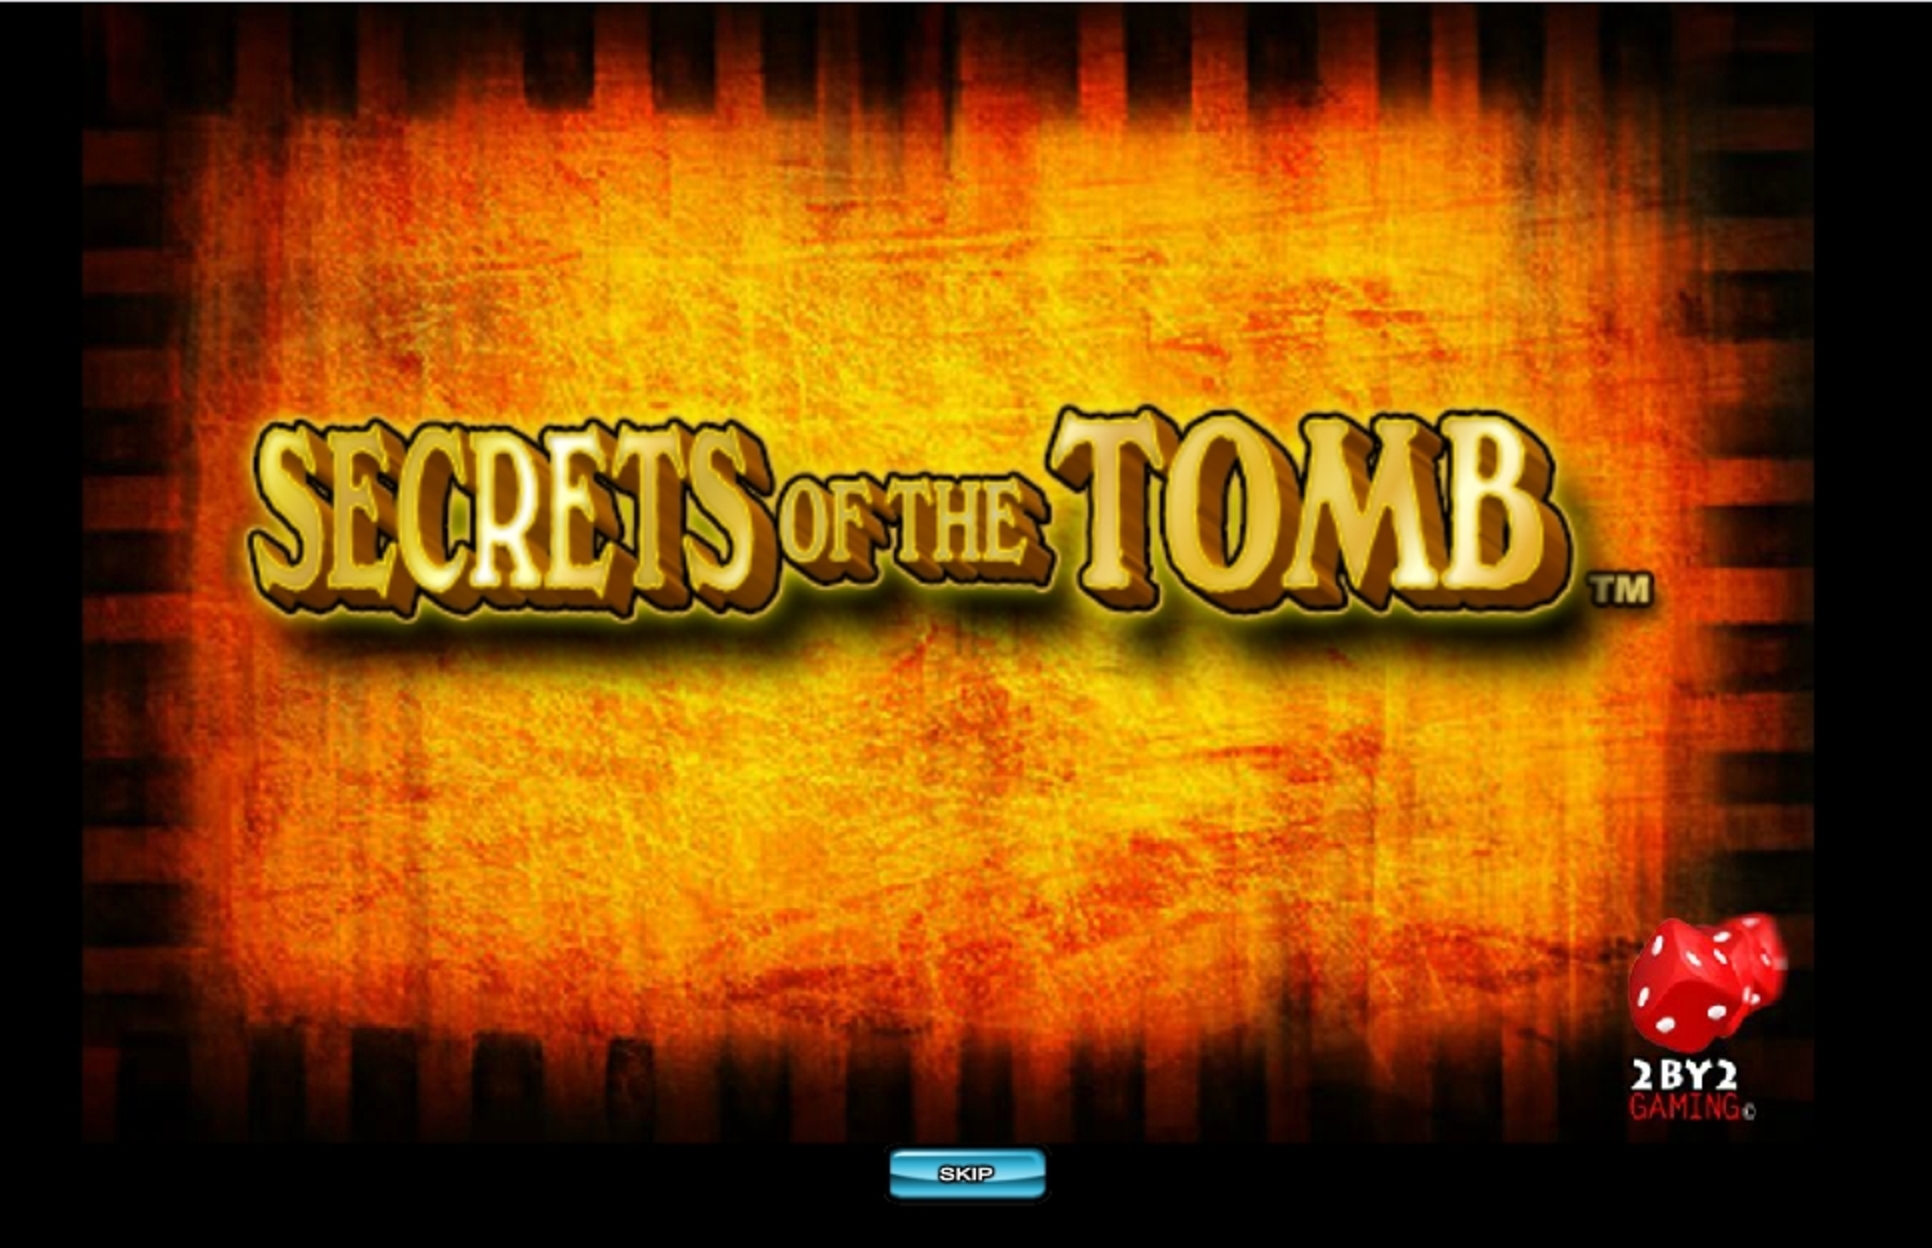 Play Secrets of the tomb Free Casino Slot Game by 2 By 2 Gaming